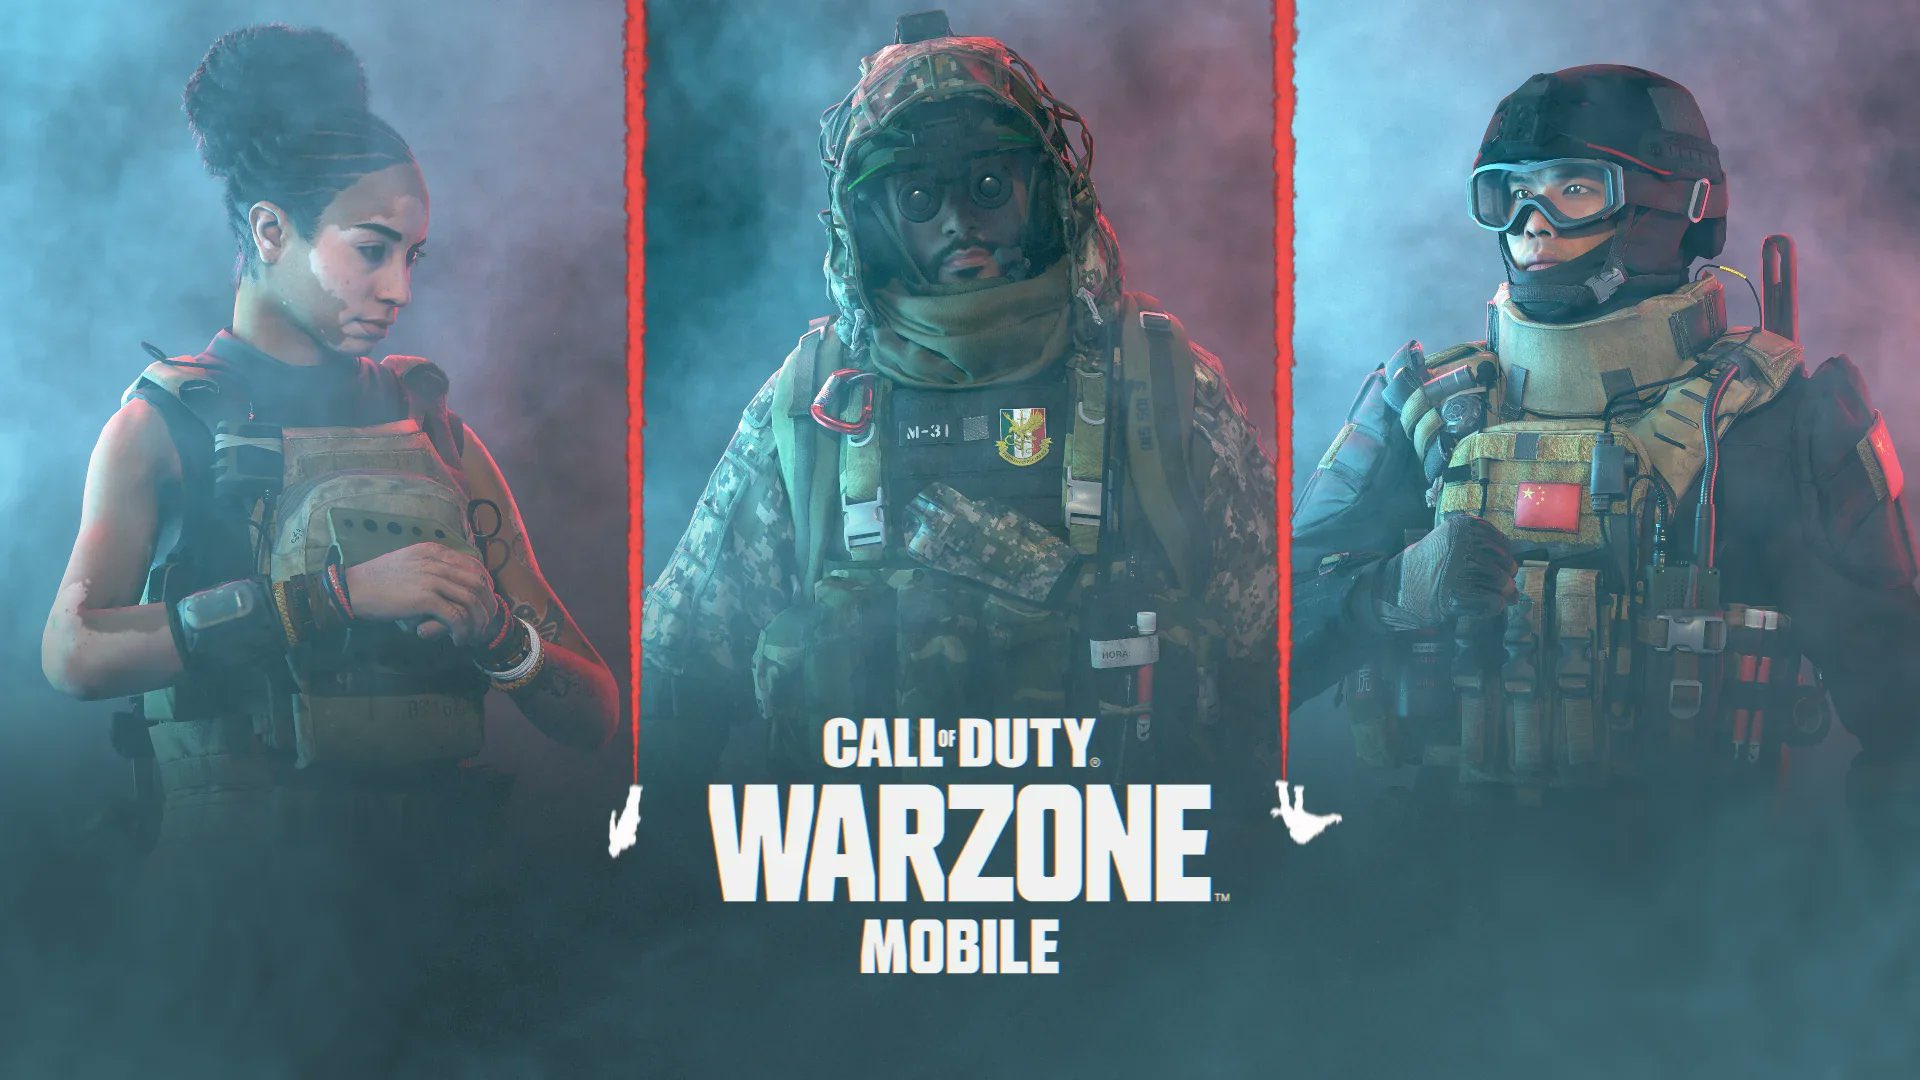 Warzone Mobile: Release Date, Beta, Details, and More Information